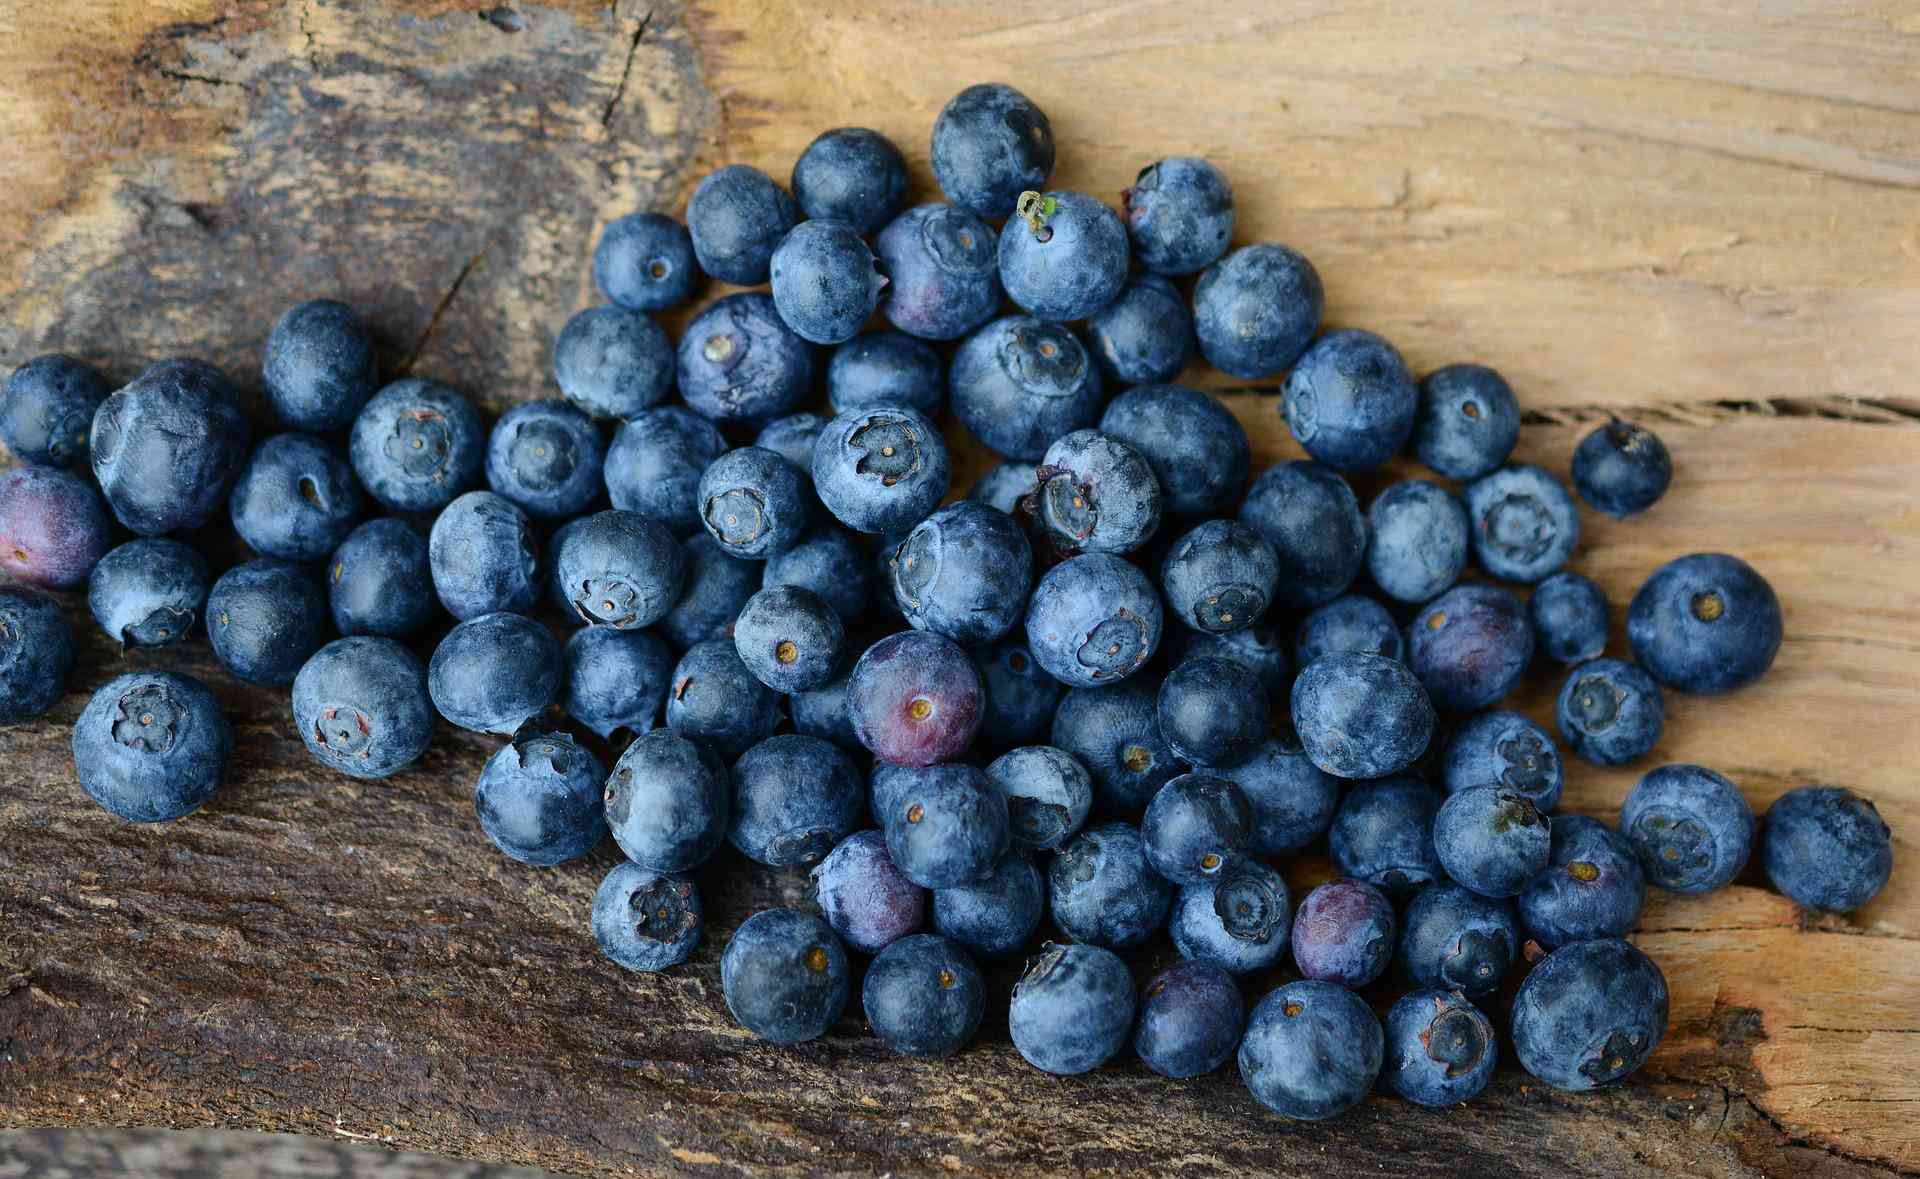 <b>Blueberries are an example of great 'superfood marketing'</b>